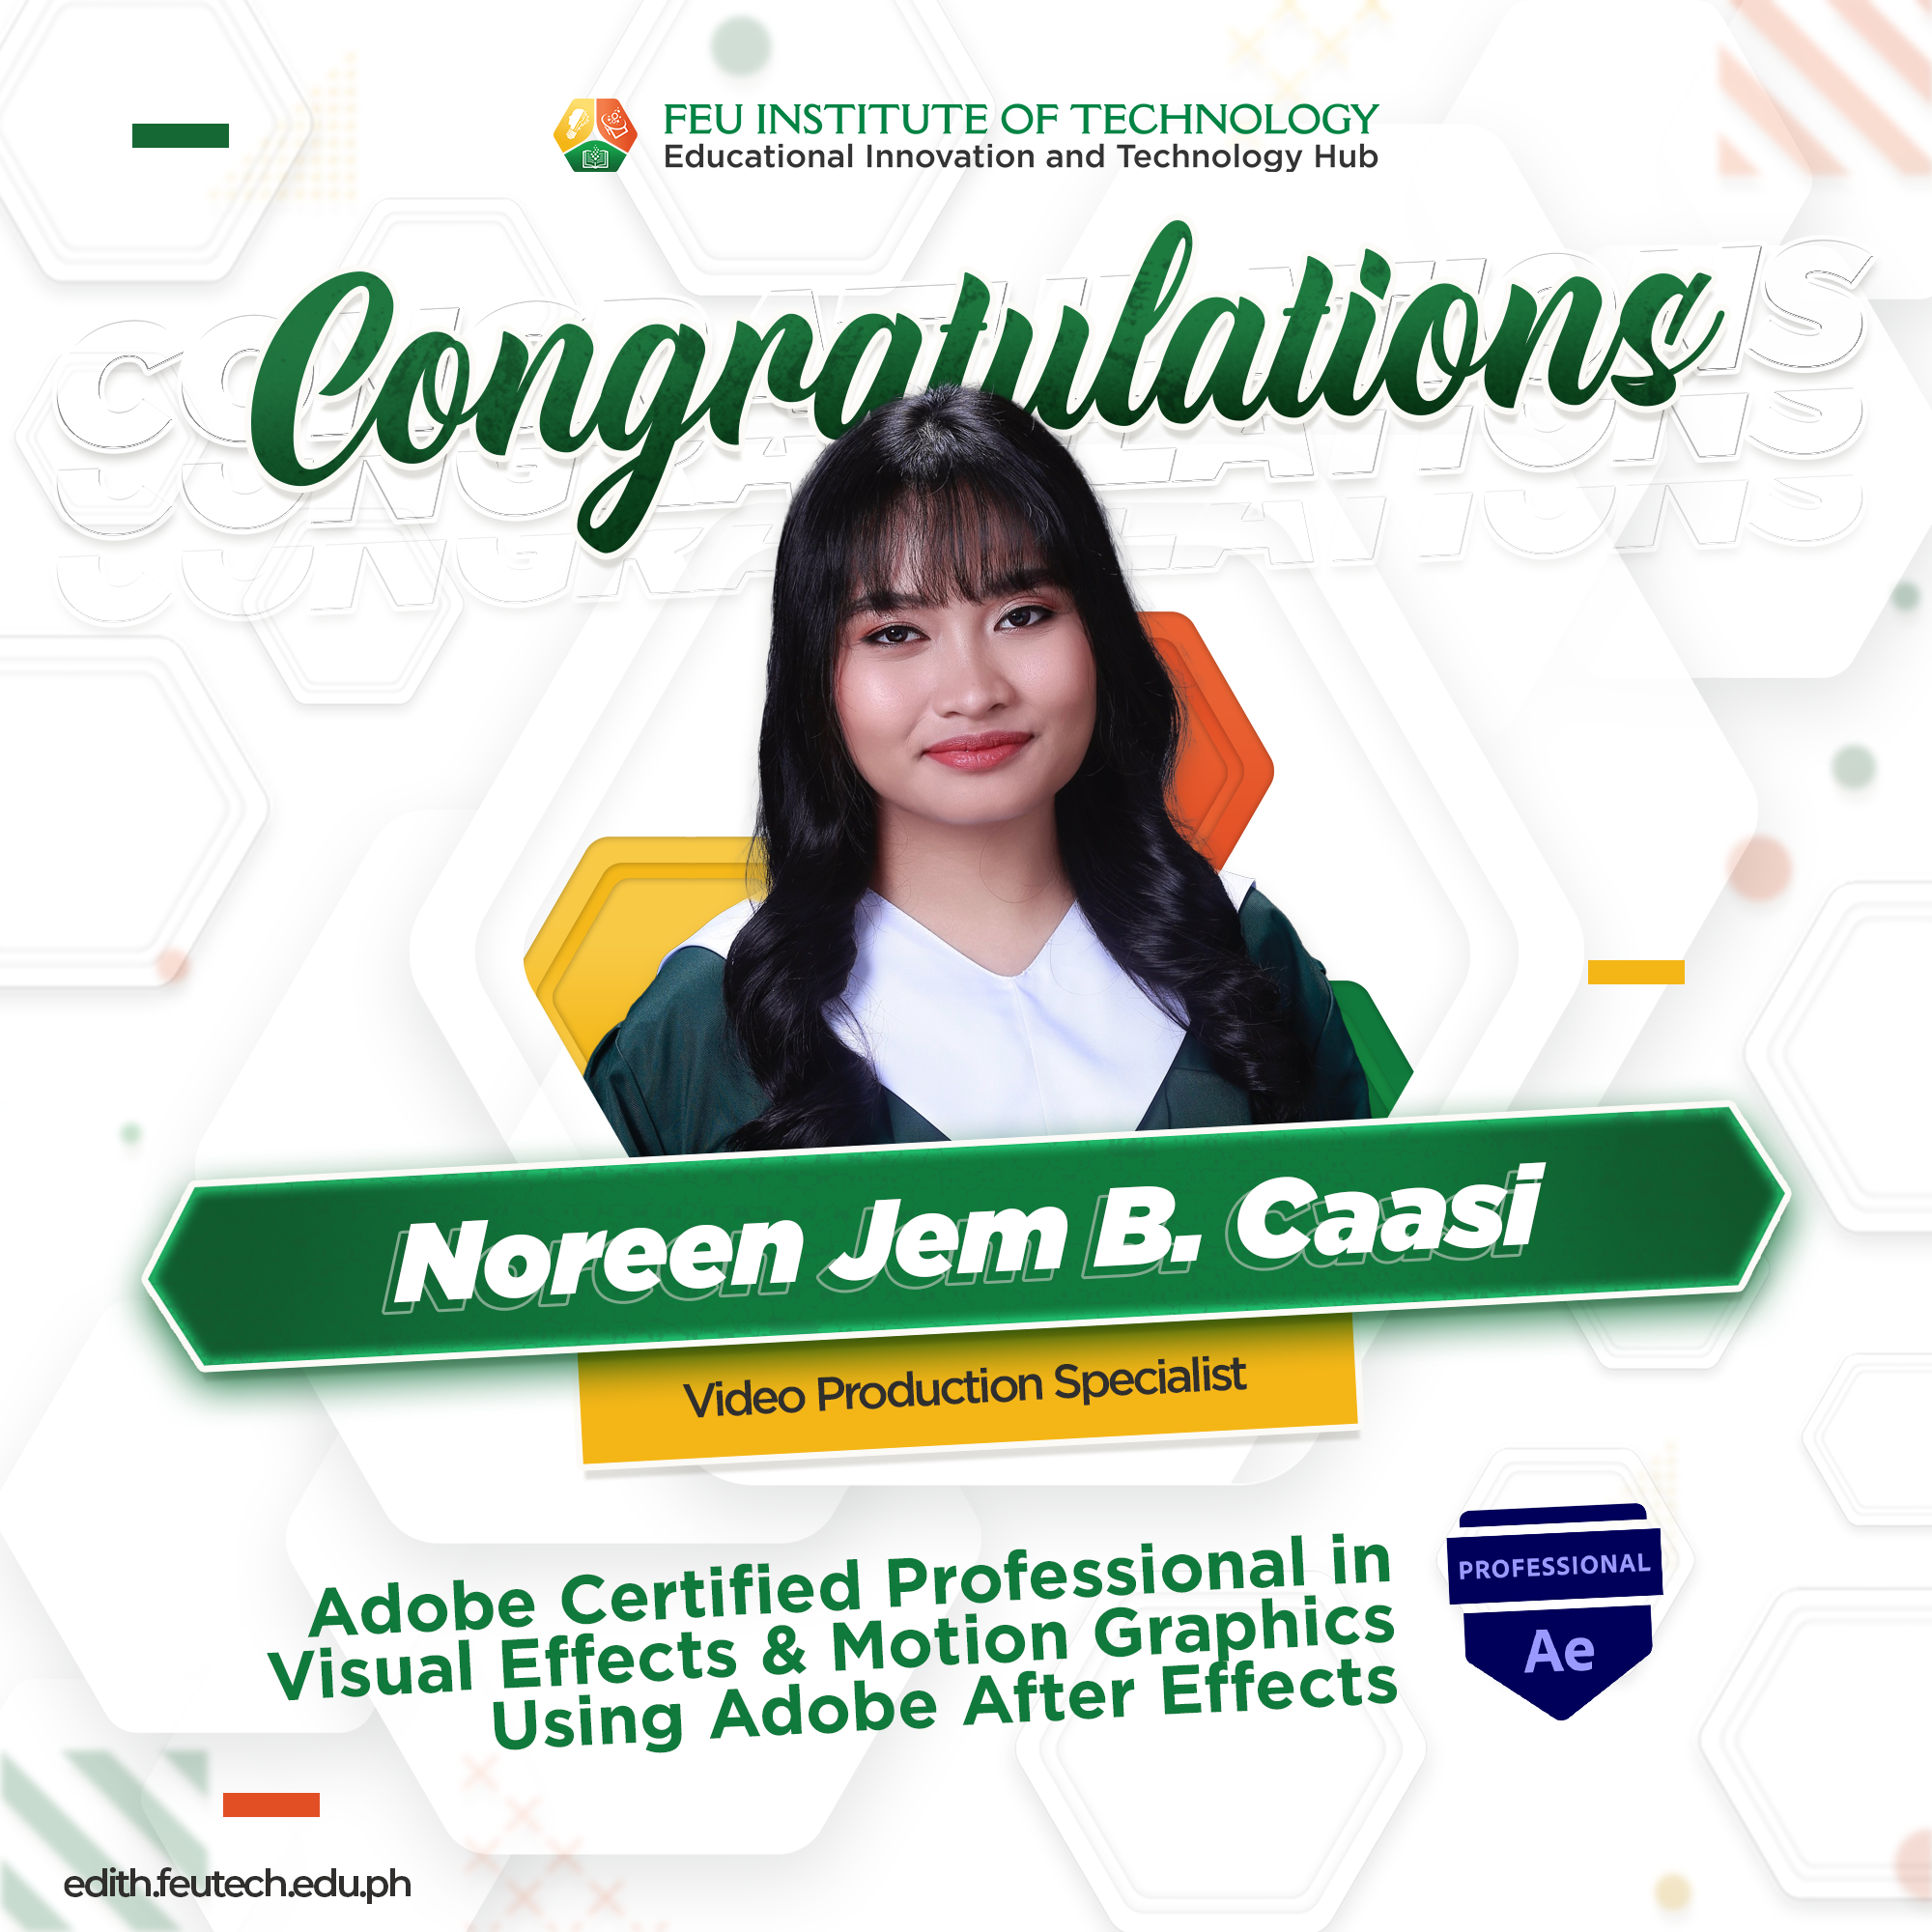 Noreen Jem B. Caasi is now an Adobe Certified Professional in Visual Effects & Motion Graphics Using Adobe After Effects